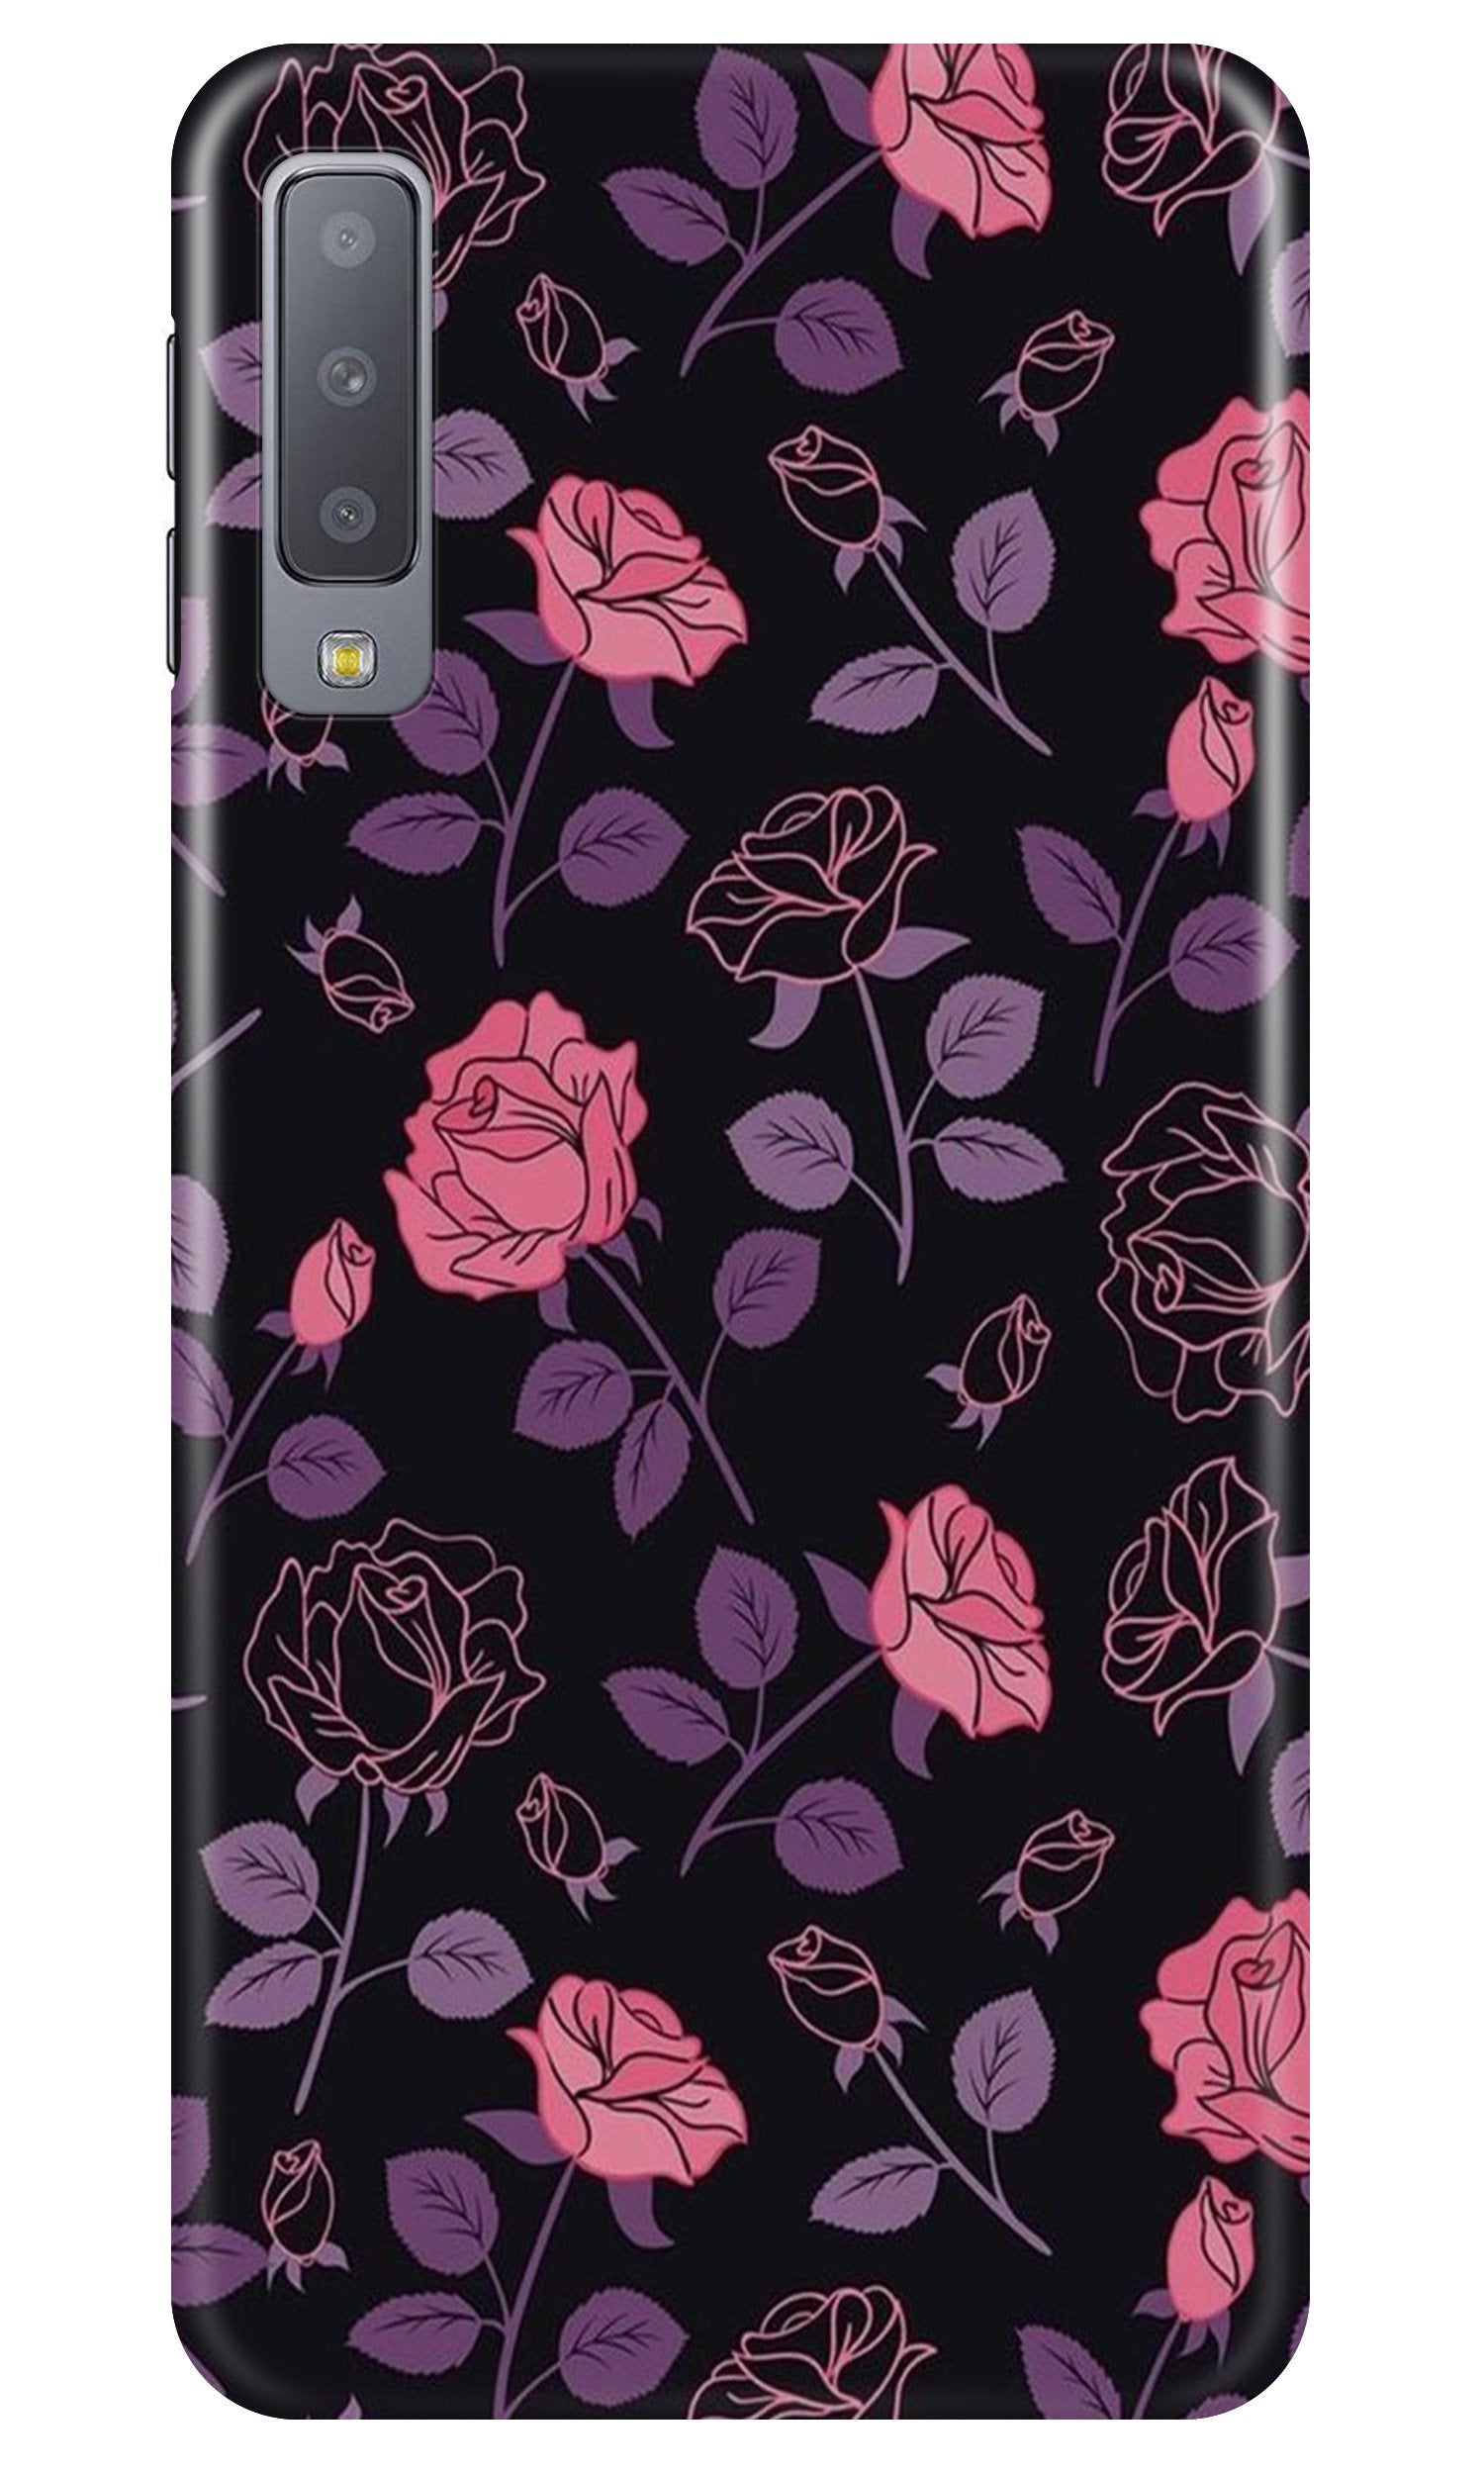 Rose Pattern Case for Samung Galaxy A70s